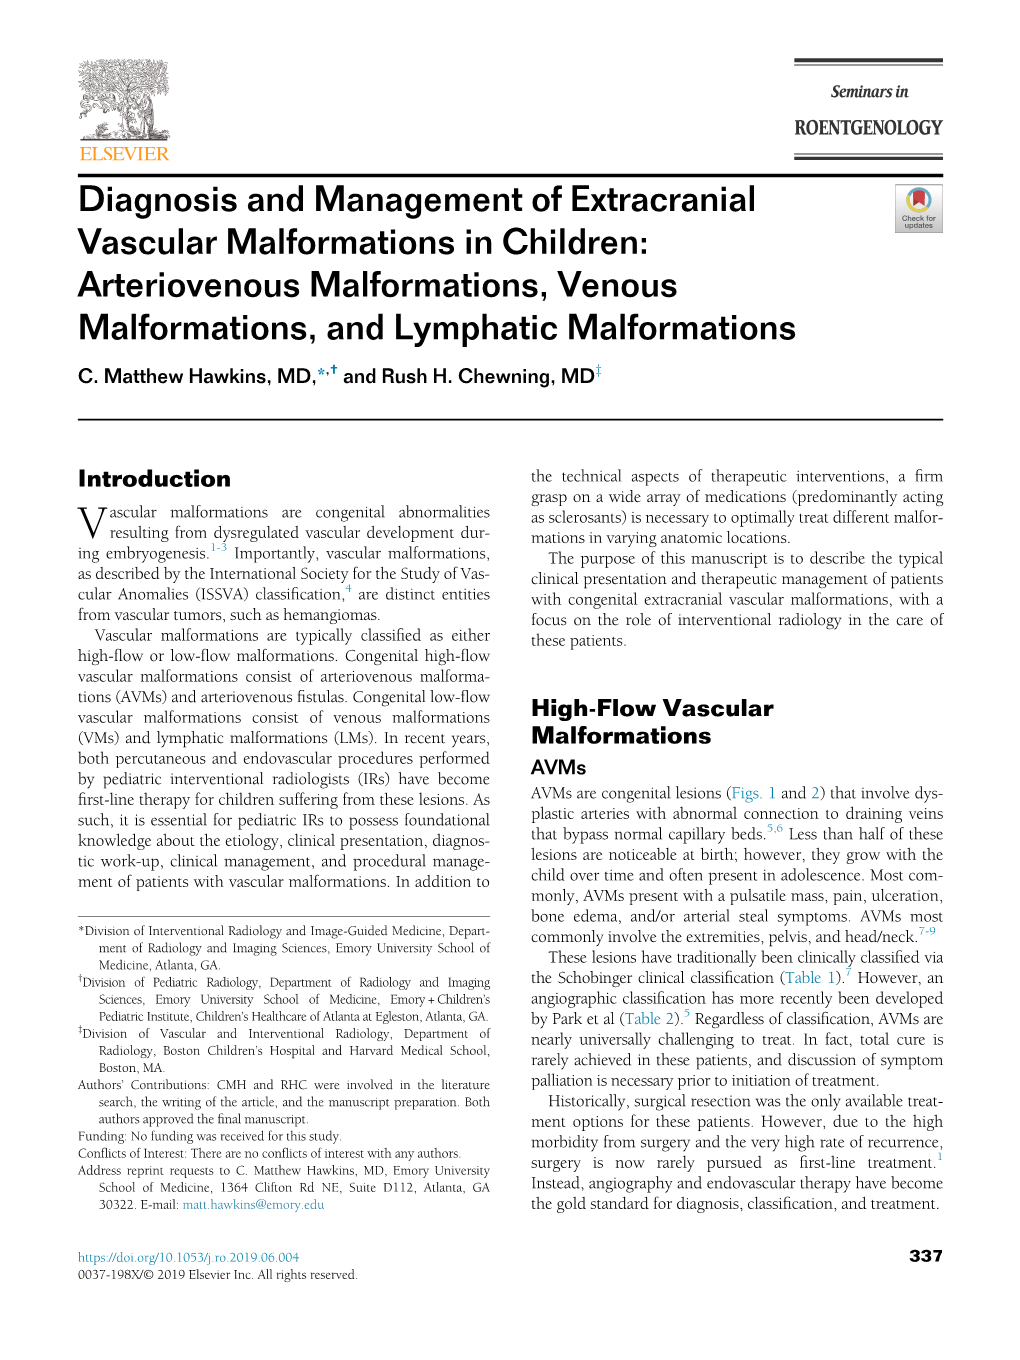 Diagnosis and Management of Extracranial Vascular Malformations in Children: Arteriovenous Malformations, Venous Malformations, and Lymphatic Malformations C